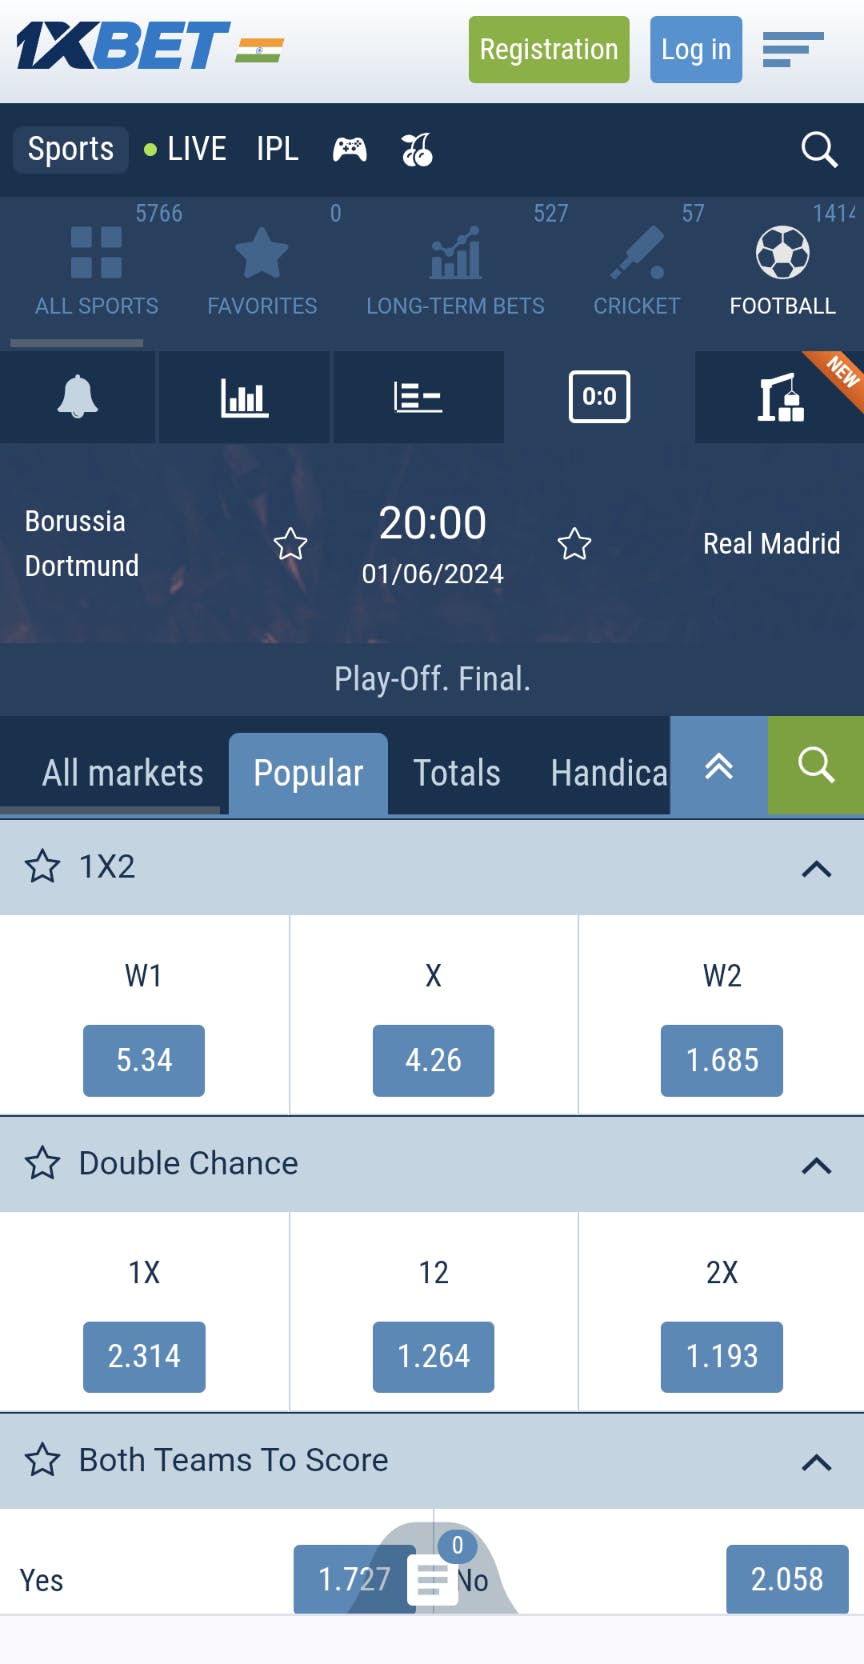 1xBet app India football betting example. UCL final.